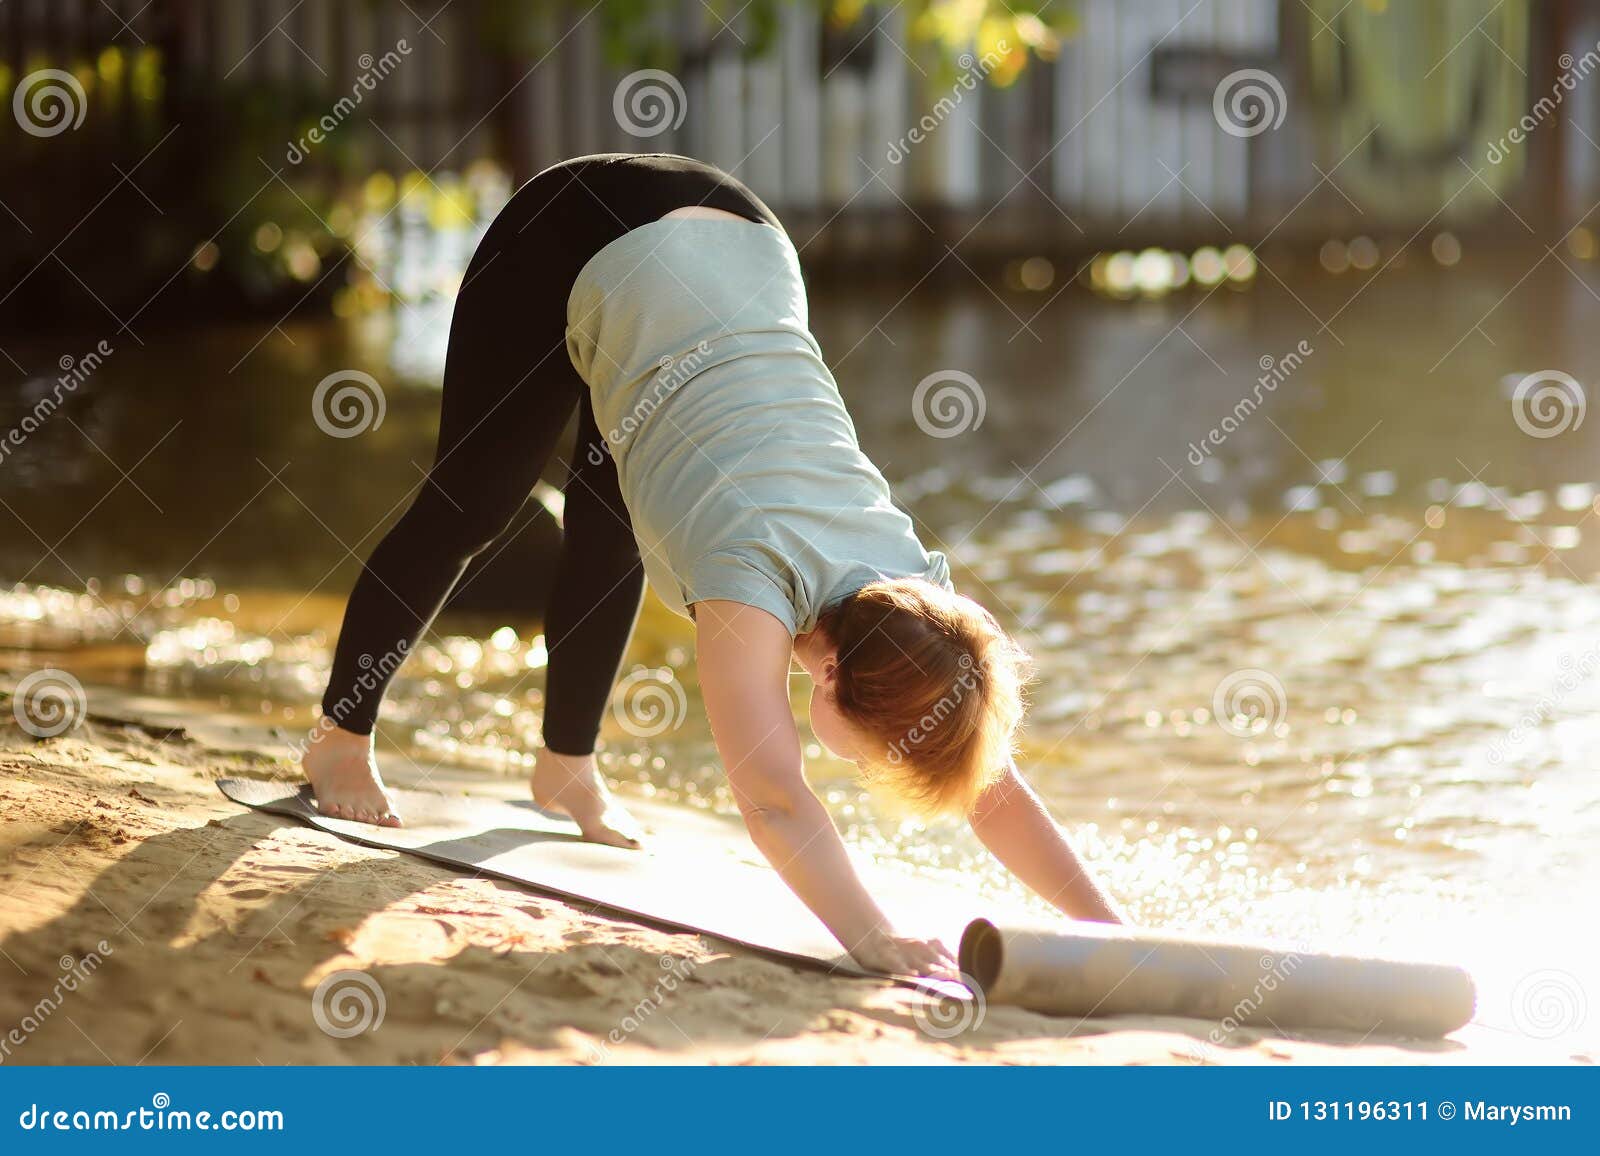 Mature Woman Practicing Yoga Outdoor Exercise On The Beach Near The River. Stock Image - Image ...